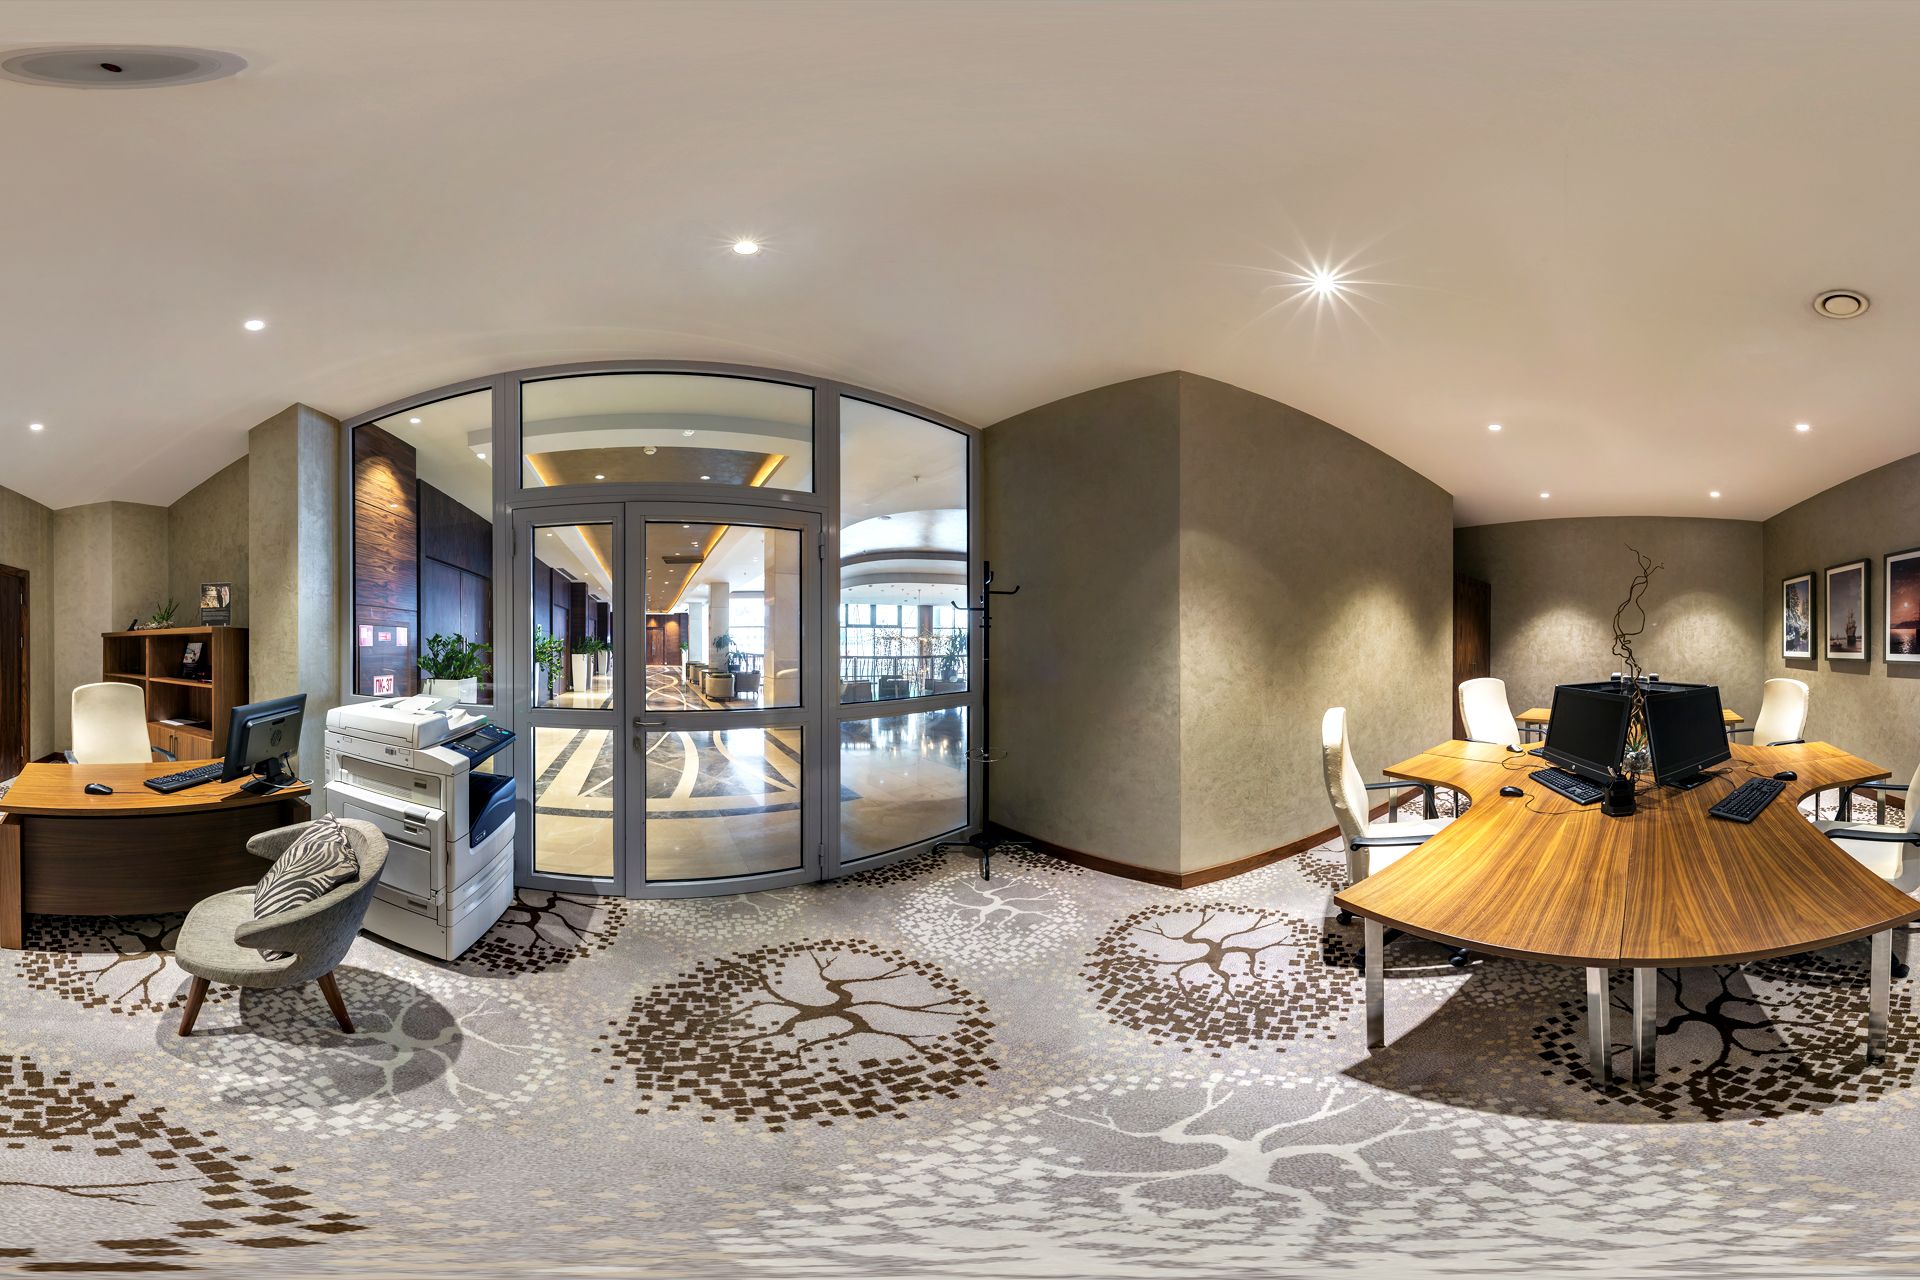 7 Benefits of Virtual 360° Tours for Corporate Offices